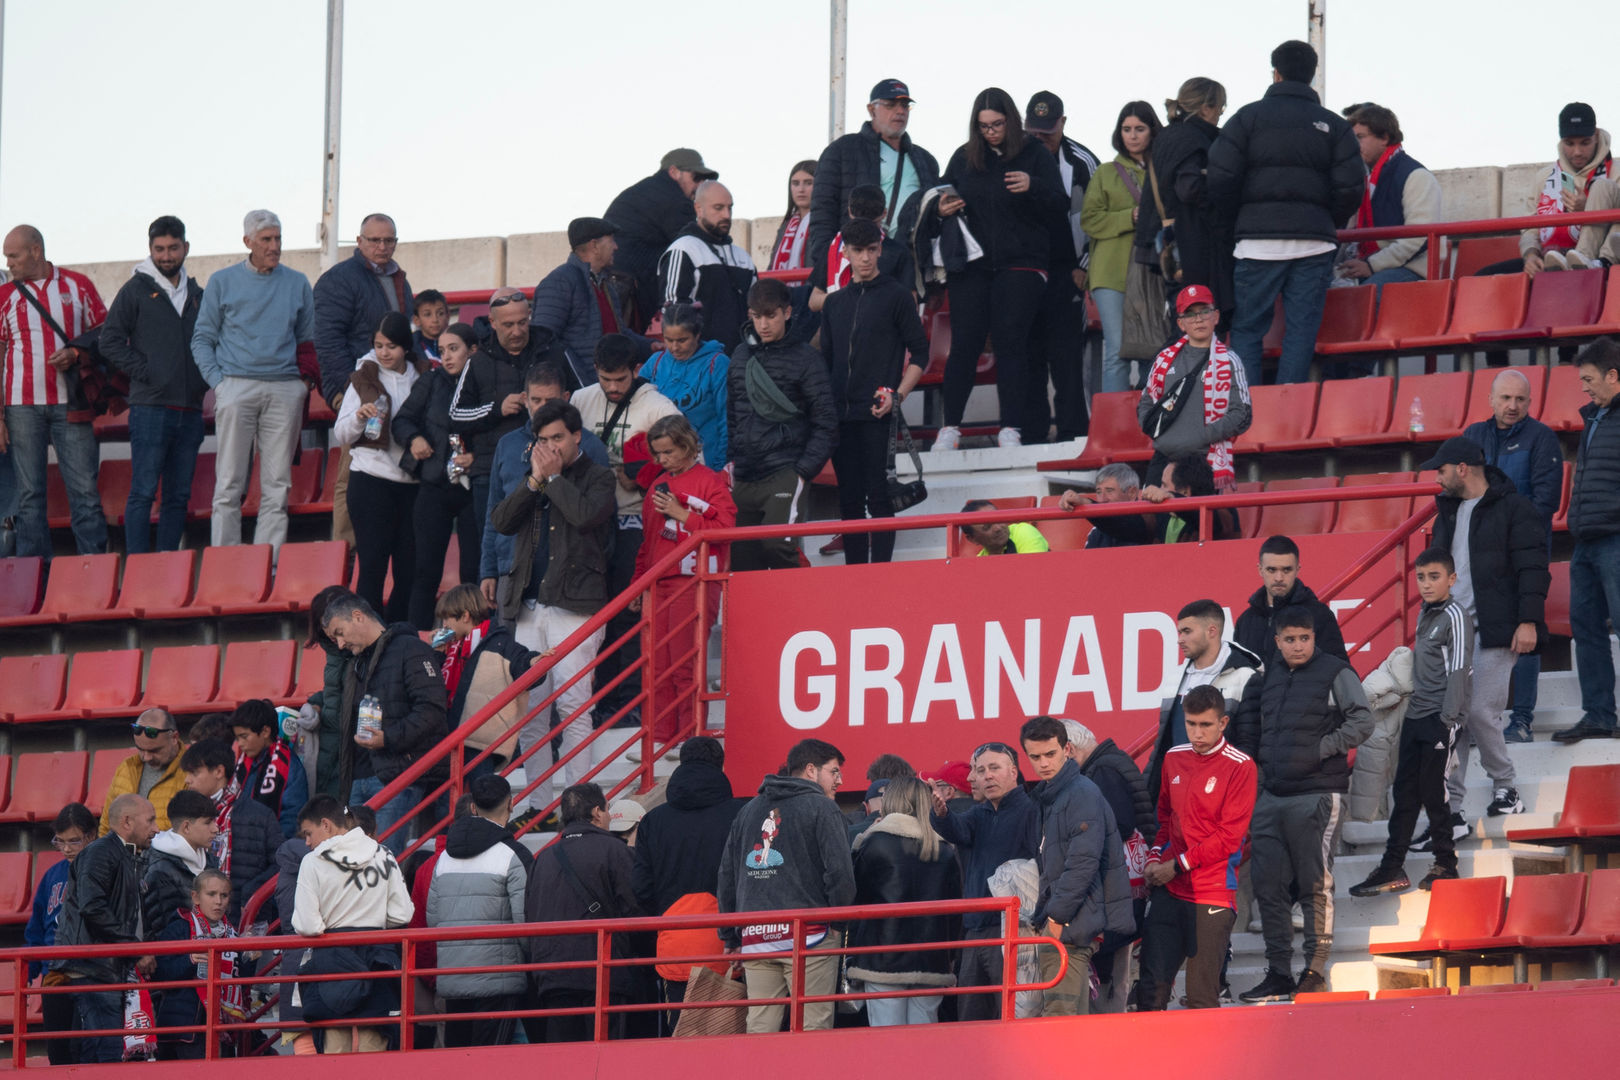 La Liga game between Granada and Athletic Club abandoned after death of fan  in stands at Nuevo Los Carmenes stadium - TNT Sports